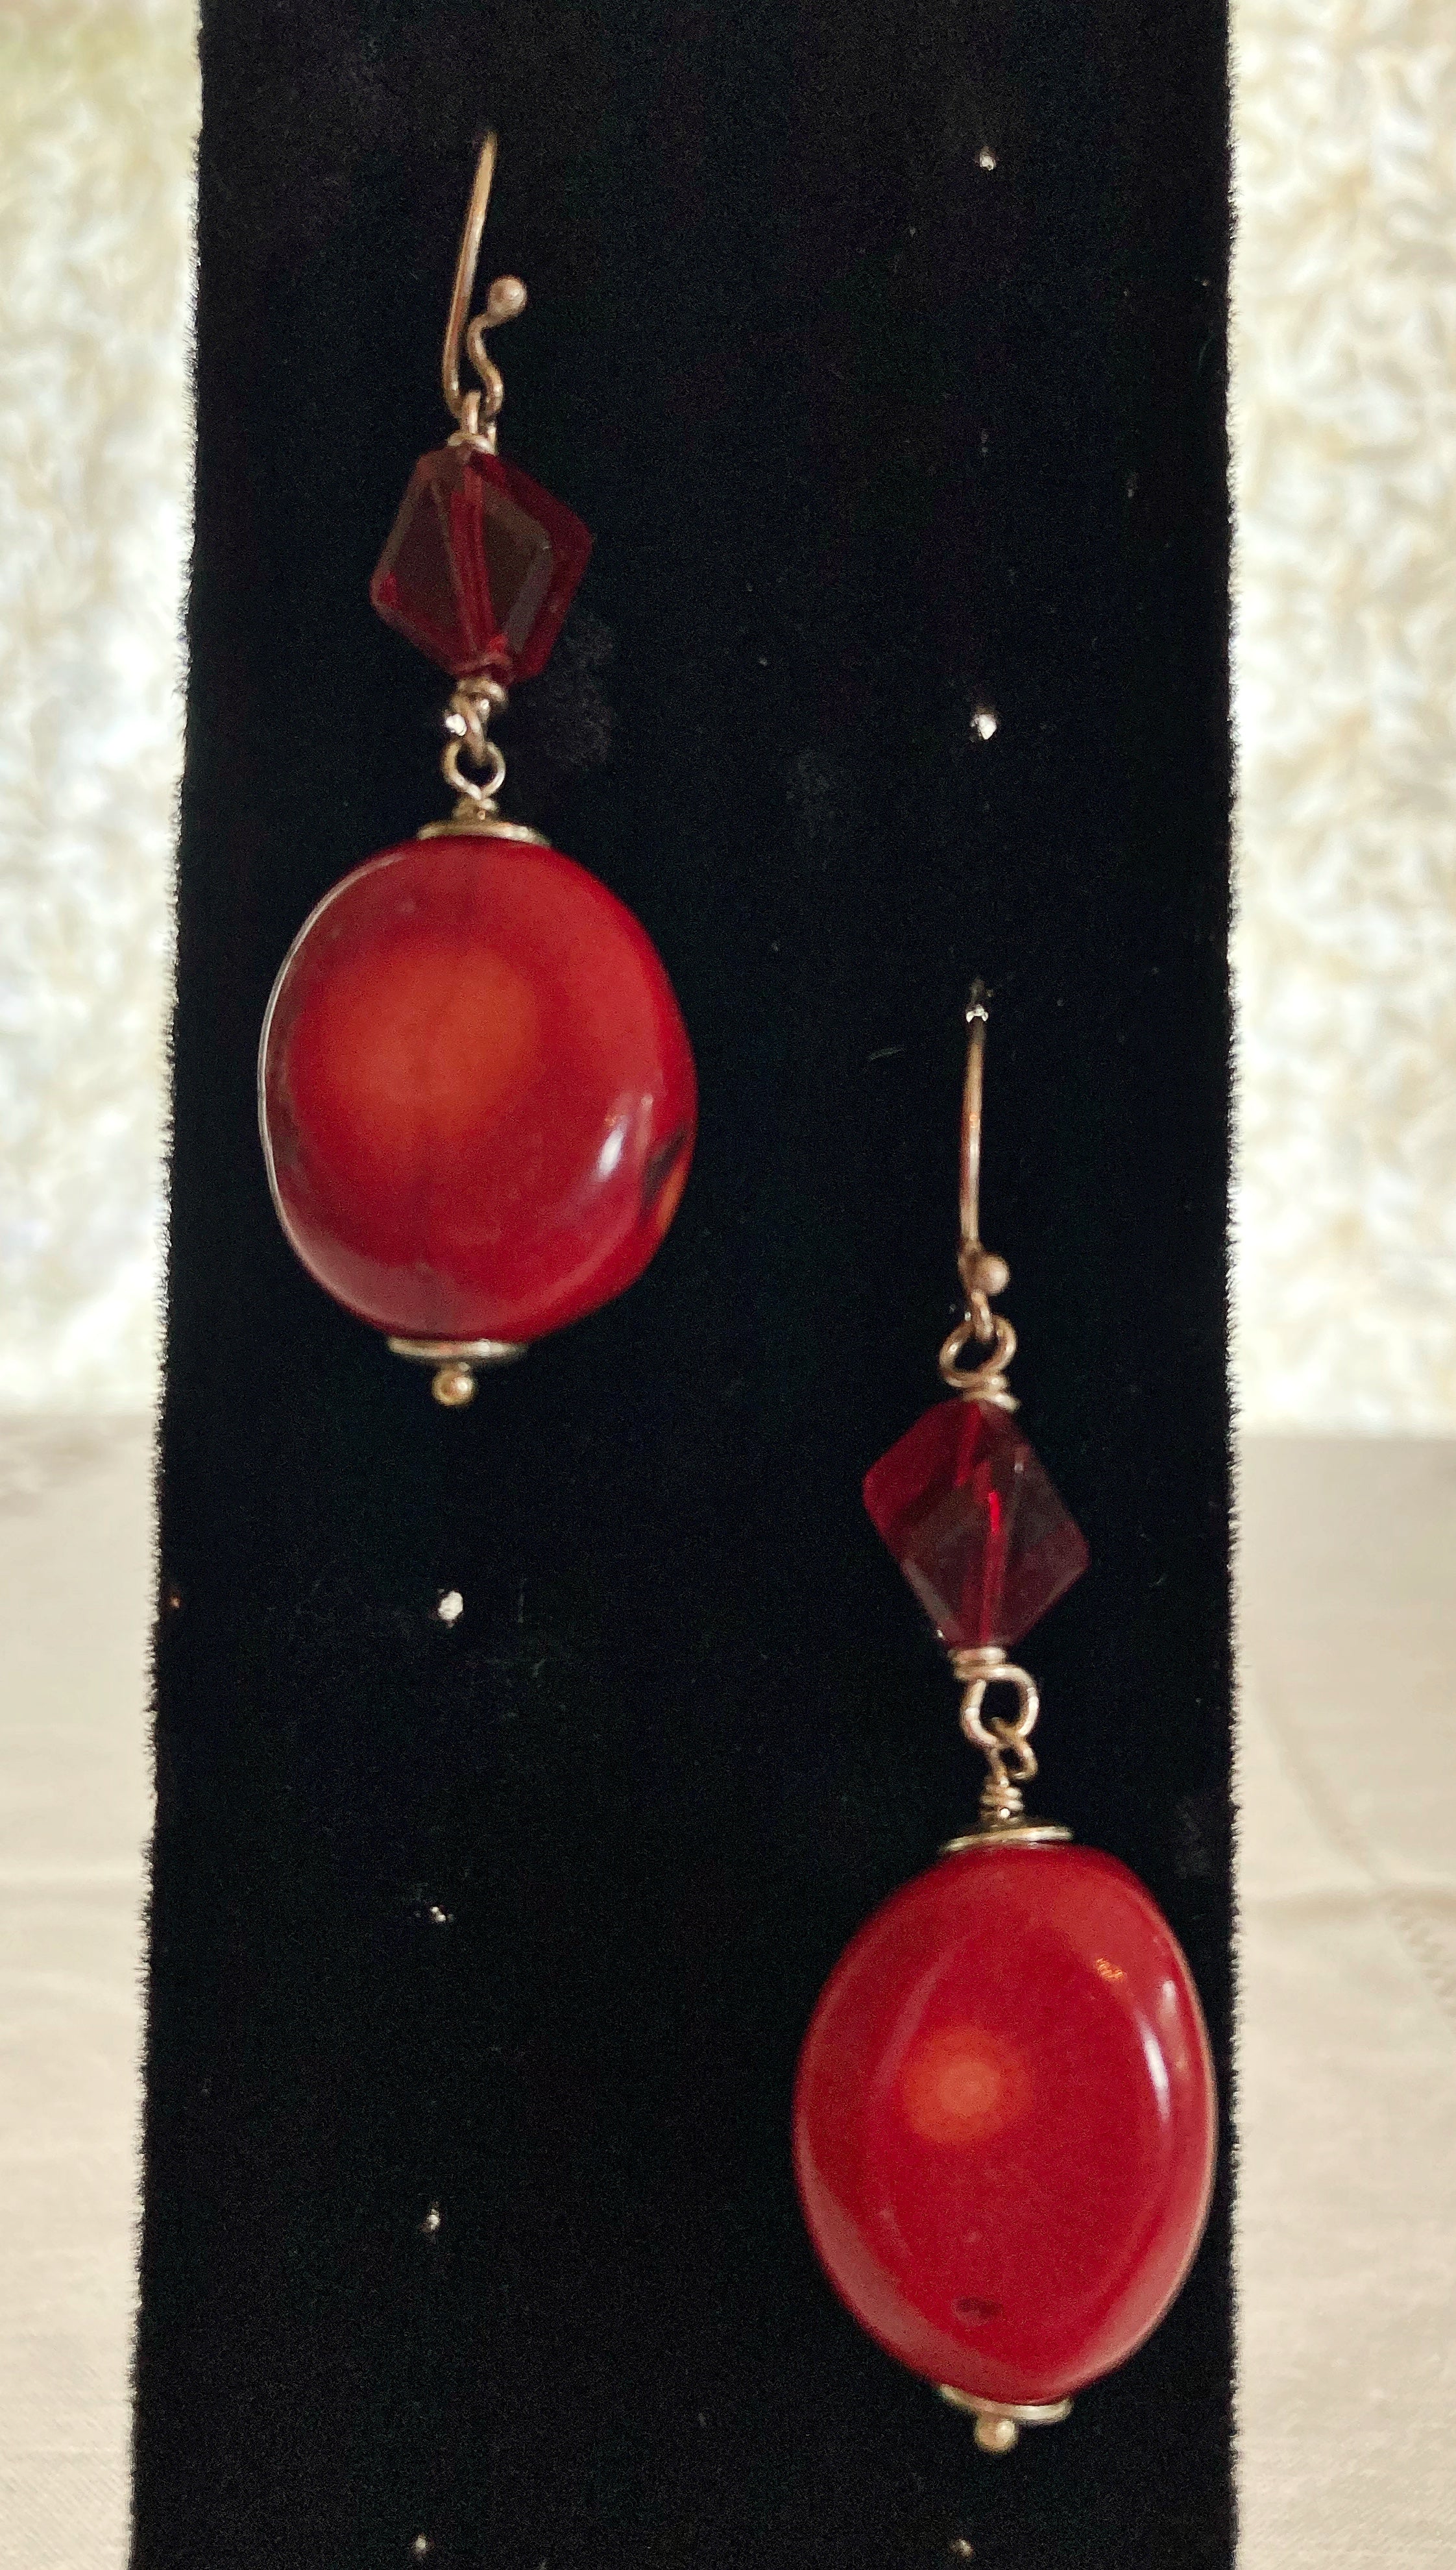 Red Stone Double Strand Necklace w/ Matching Earrings